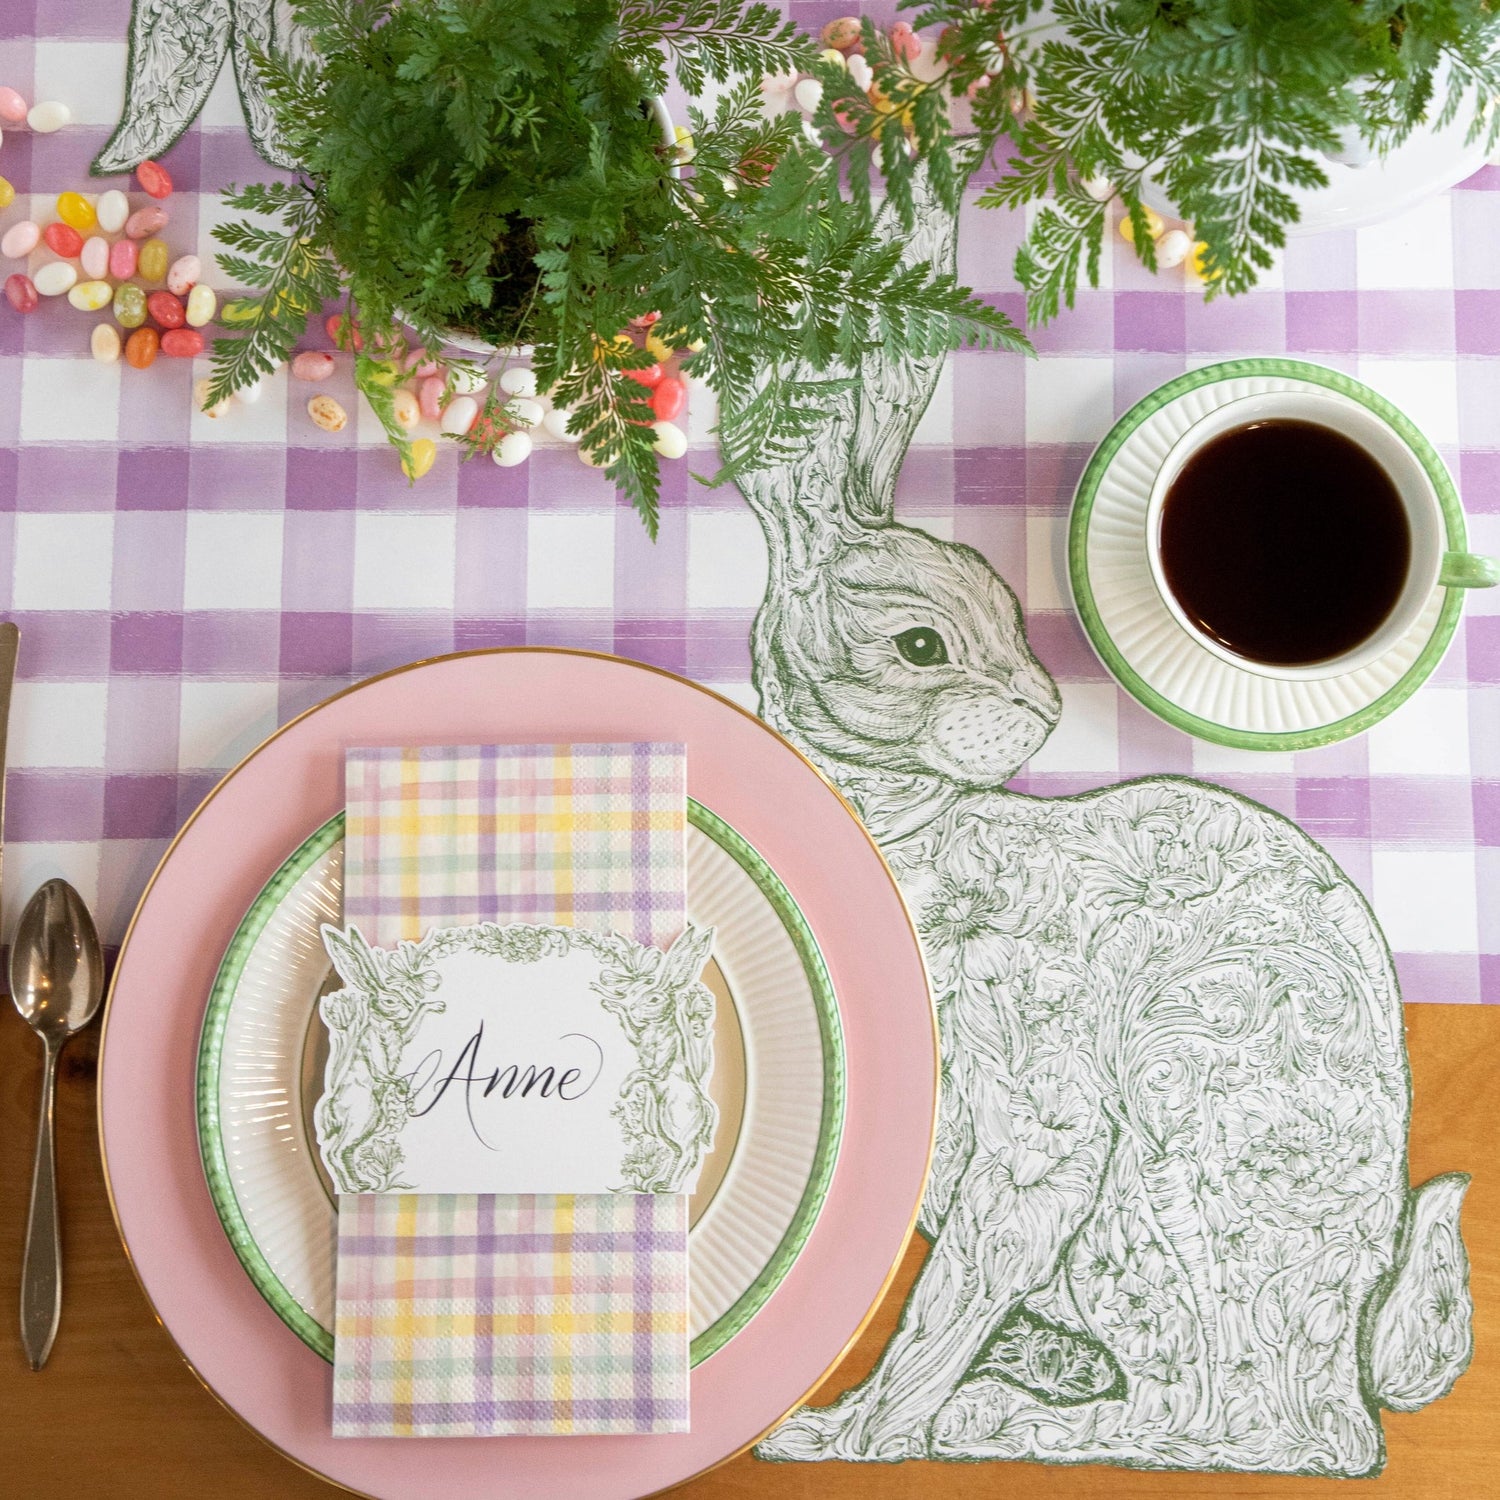 The Die-cut Greenhouse Hare Placemat under an elegant Easter place setting, from above.